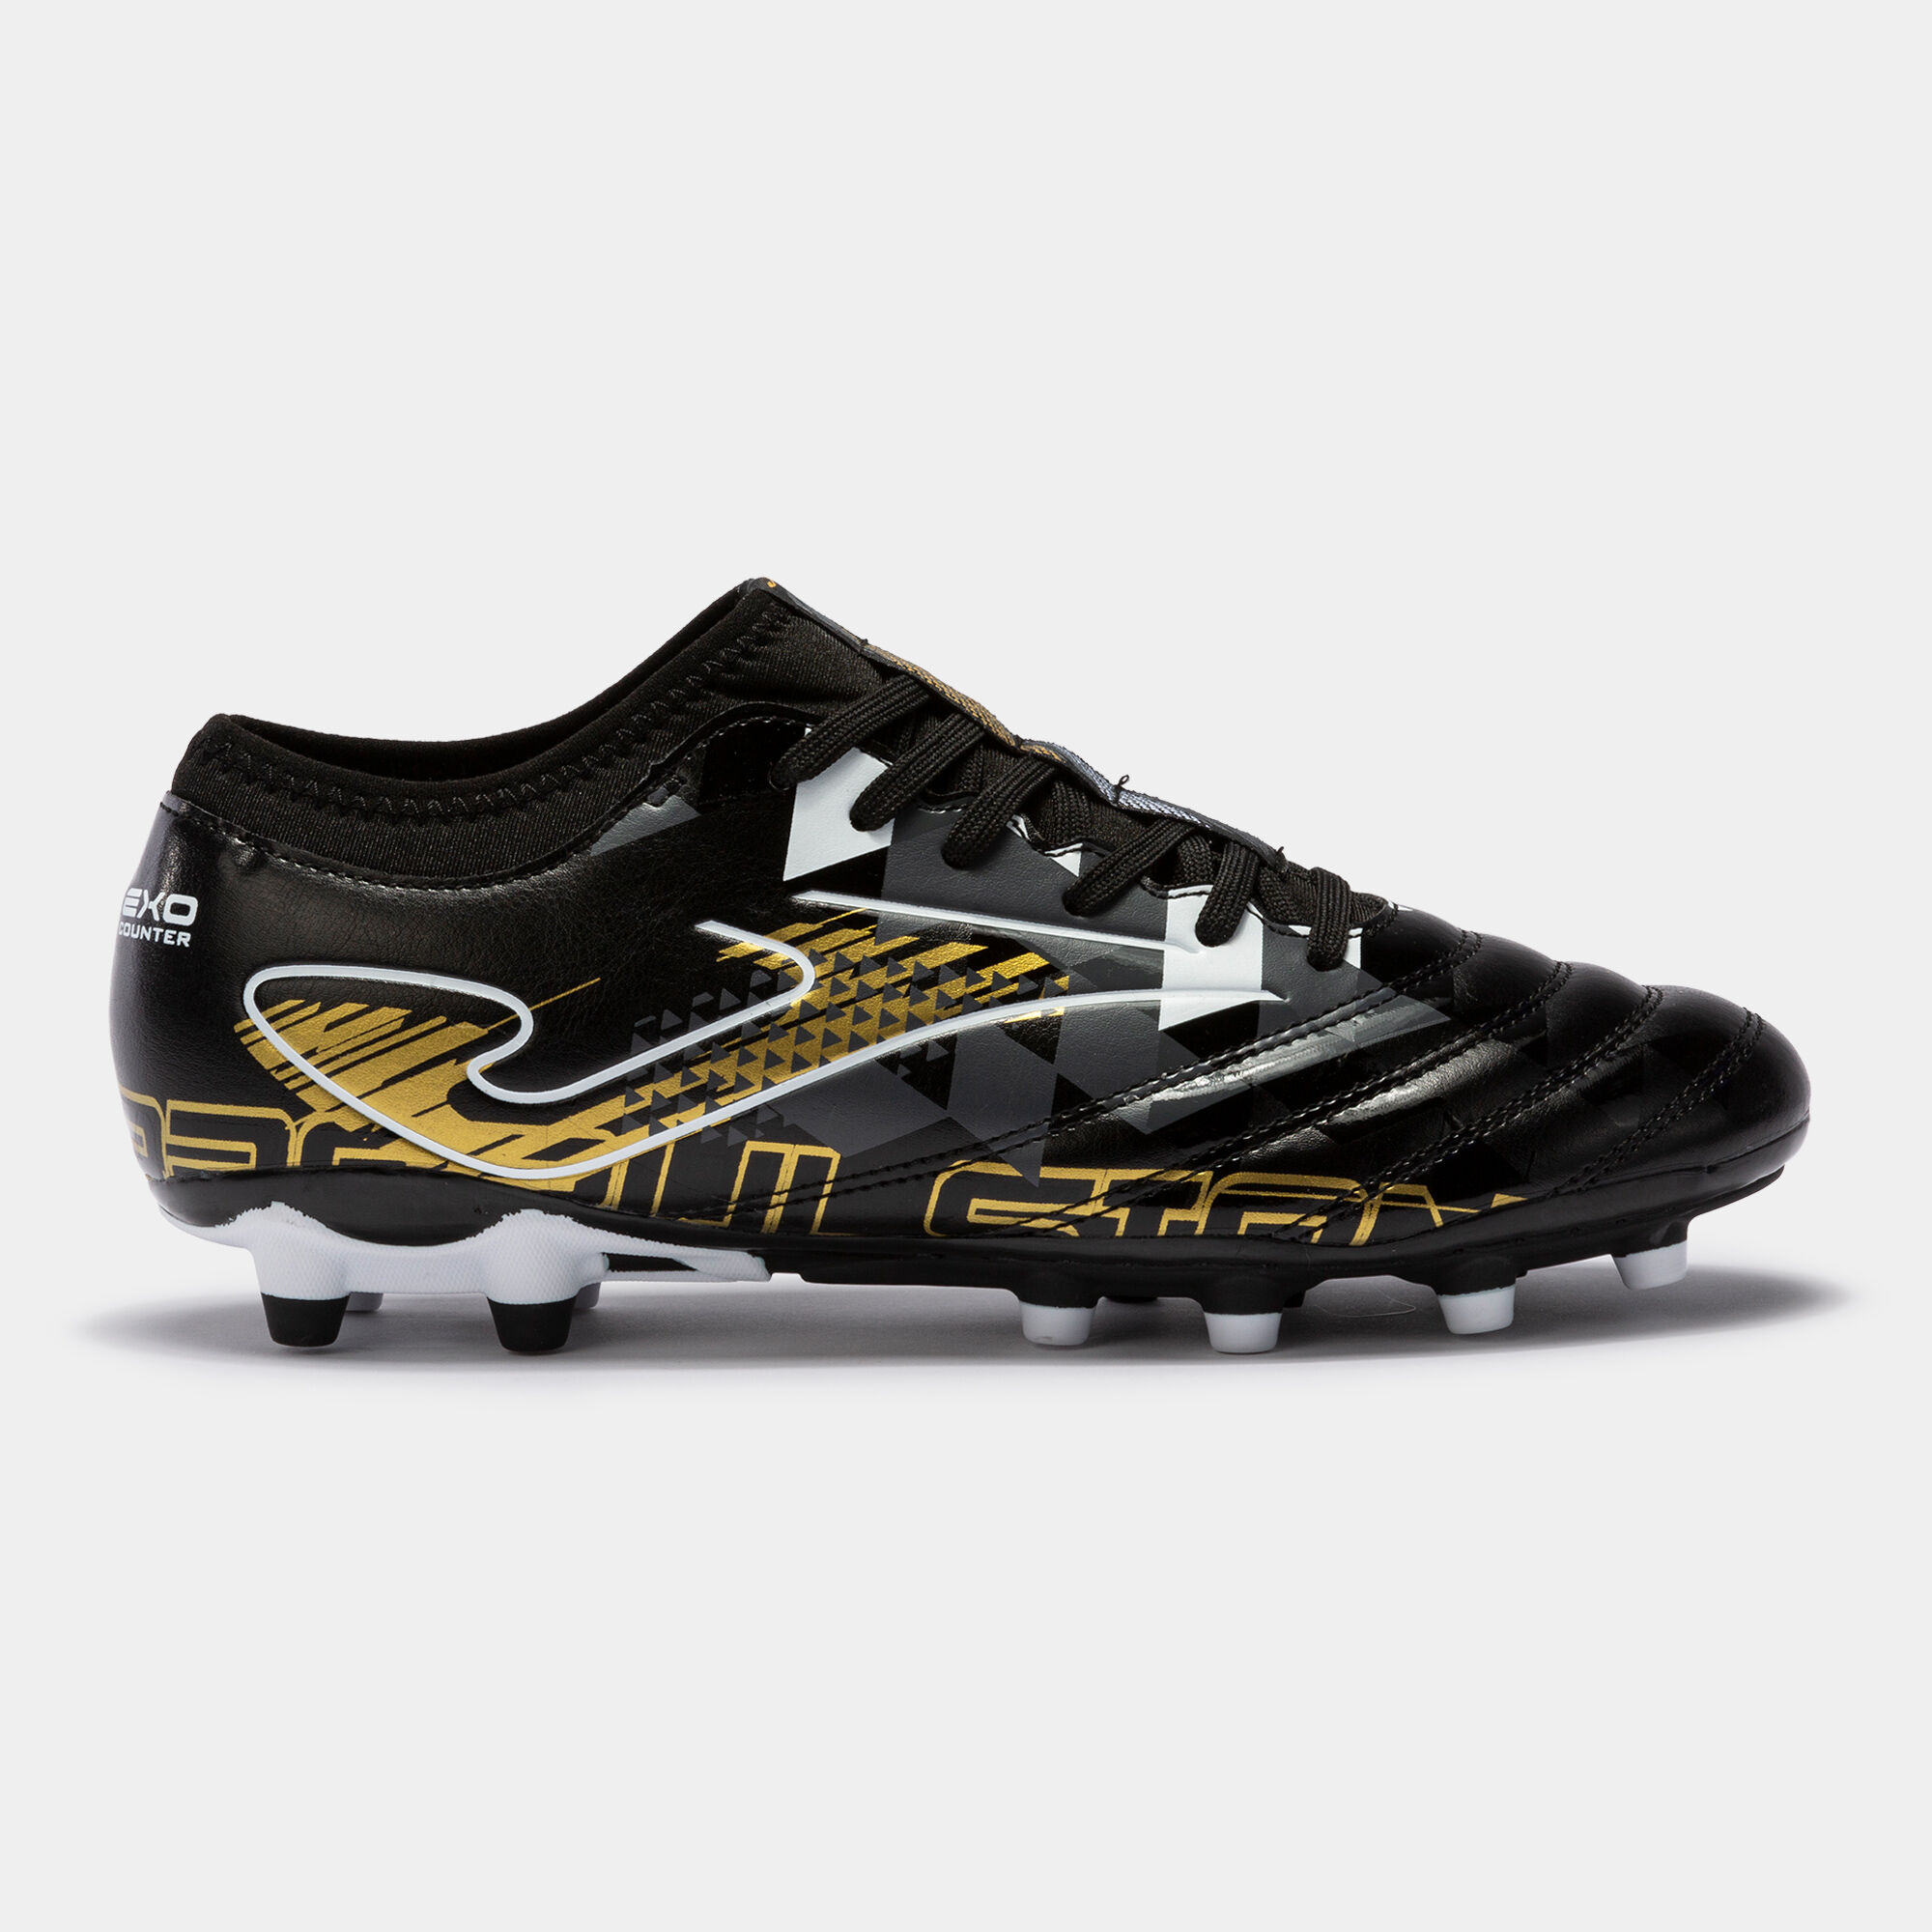 FOOTBALL BOOTS PROPULSION 22 FIRM GROUND FG BLACK